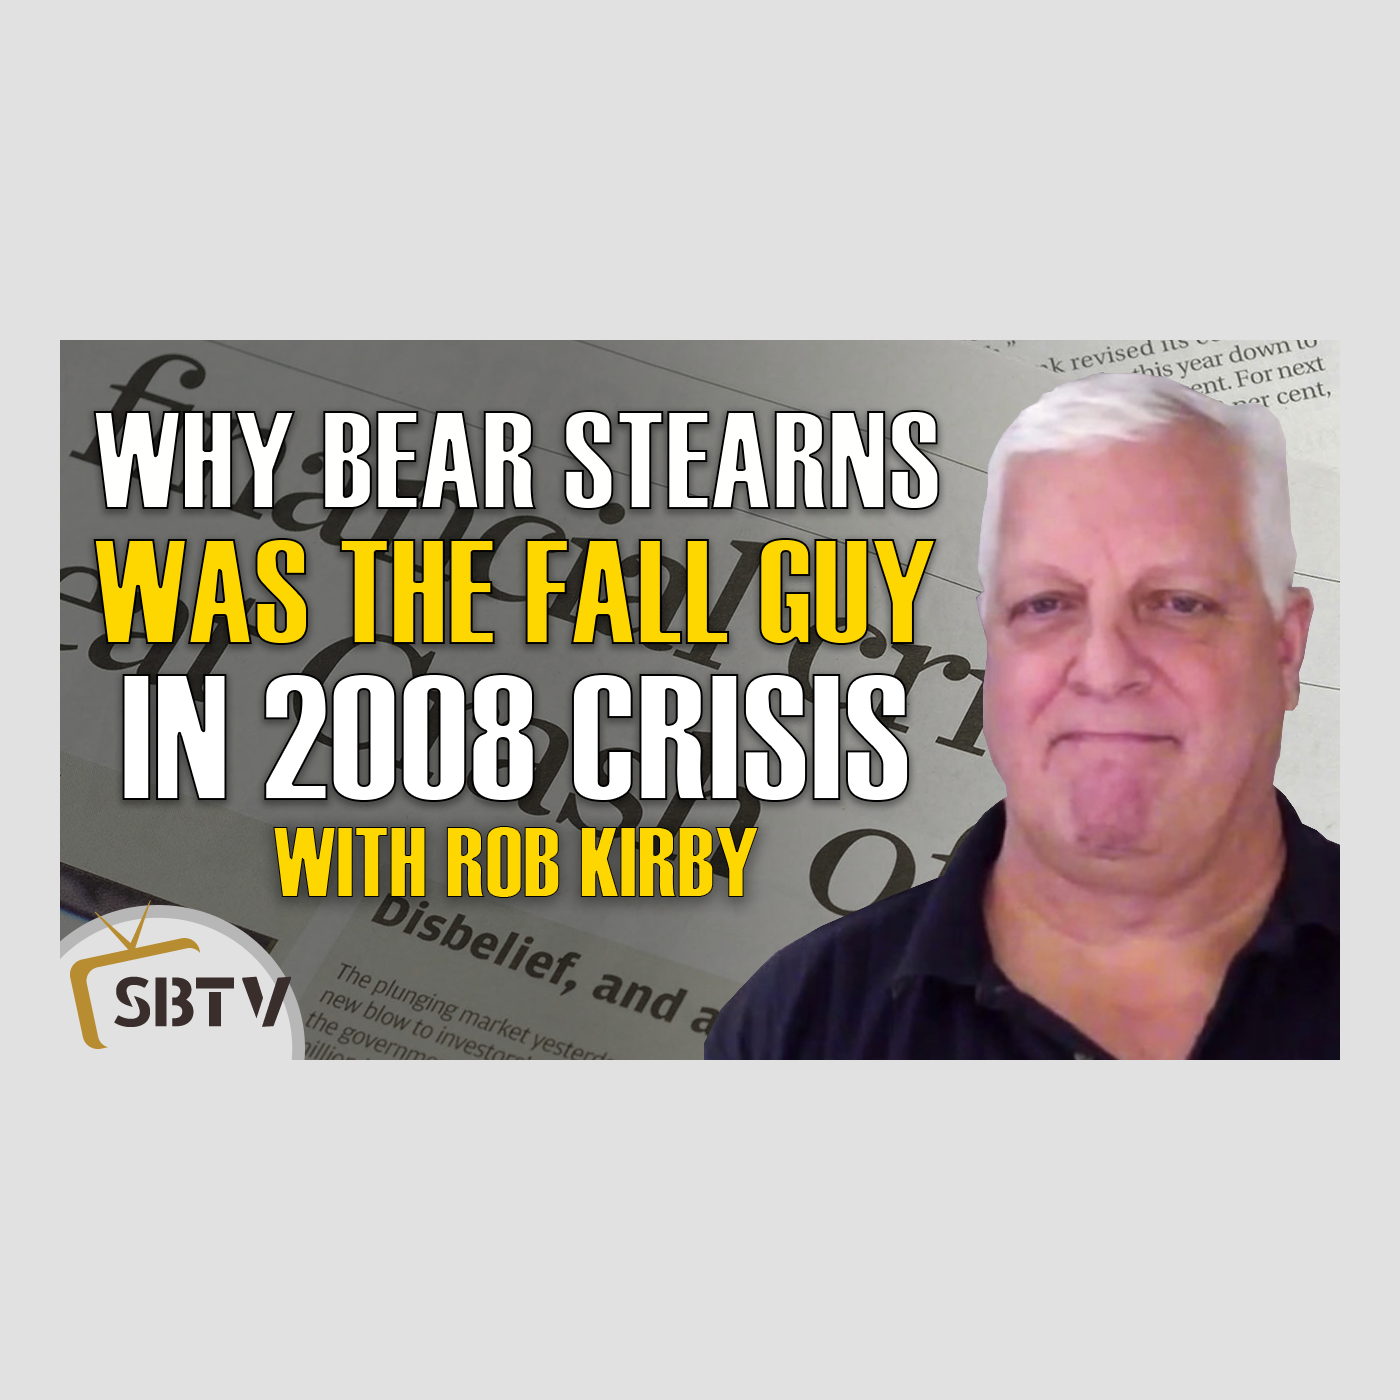 56 Rob Kirby - The Fall of LTCM and How Bear Stearns Became The Fall Guy In 2008 Financial Crisis